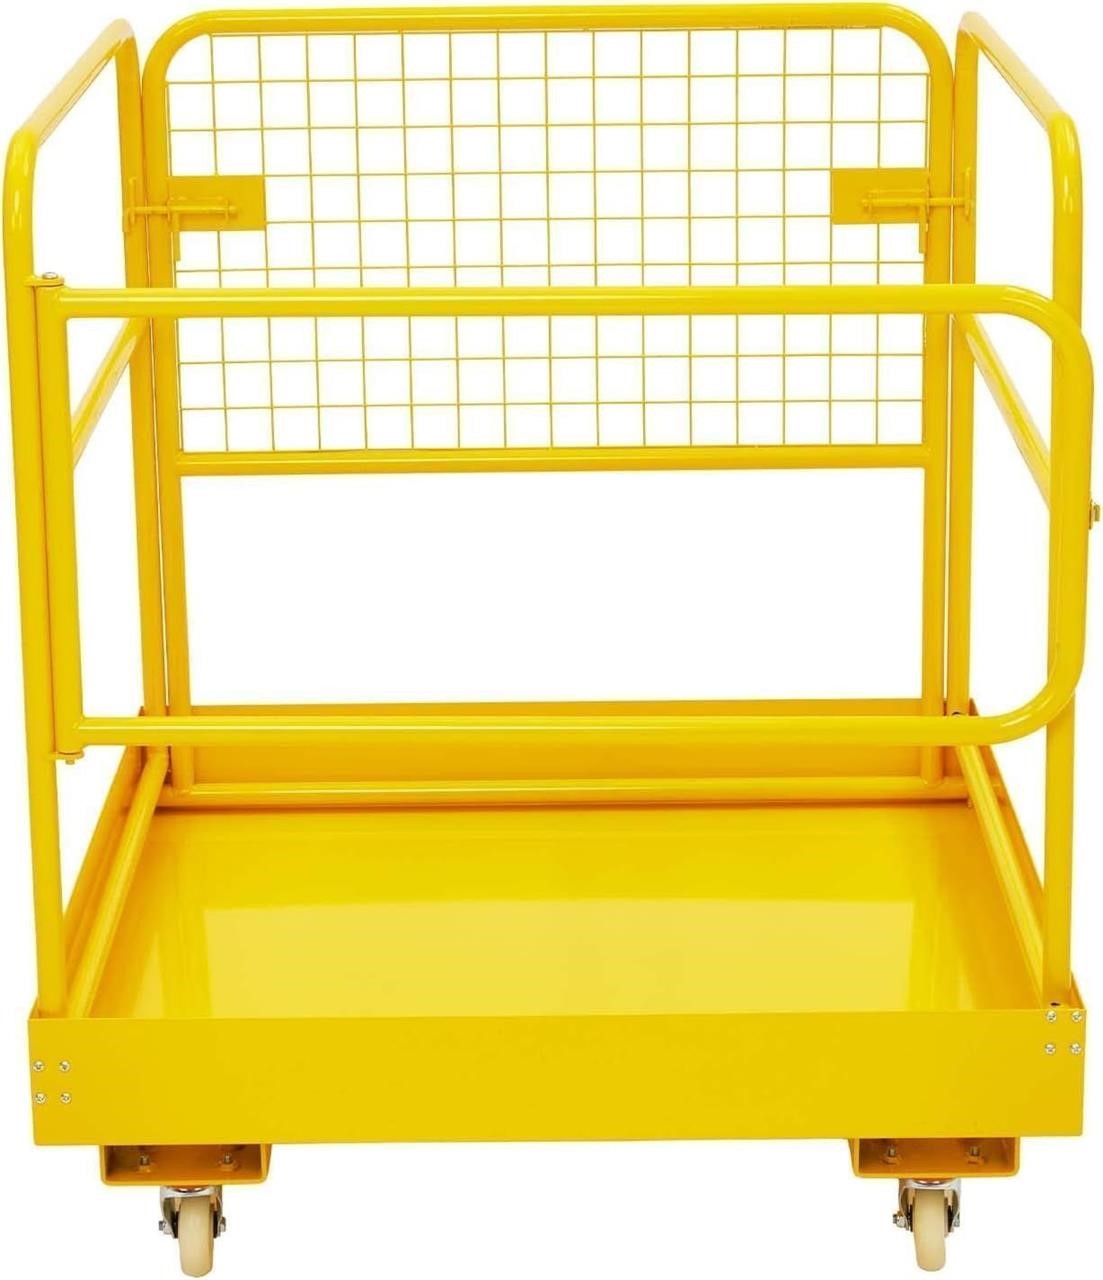 $272 - CuisinAid Forklift Safety Cage, 36"x36" HD